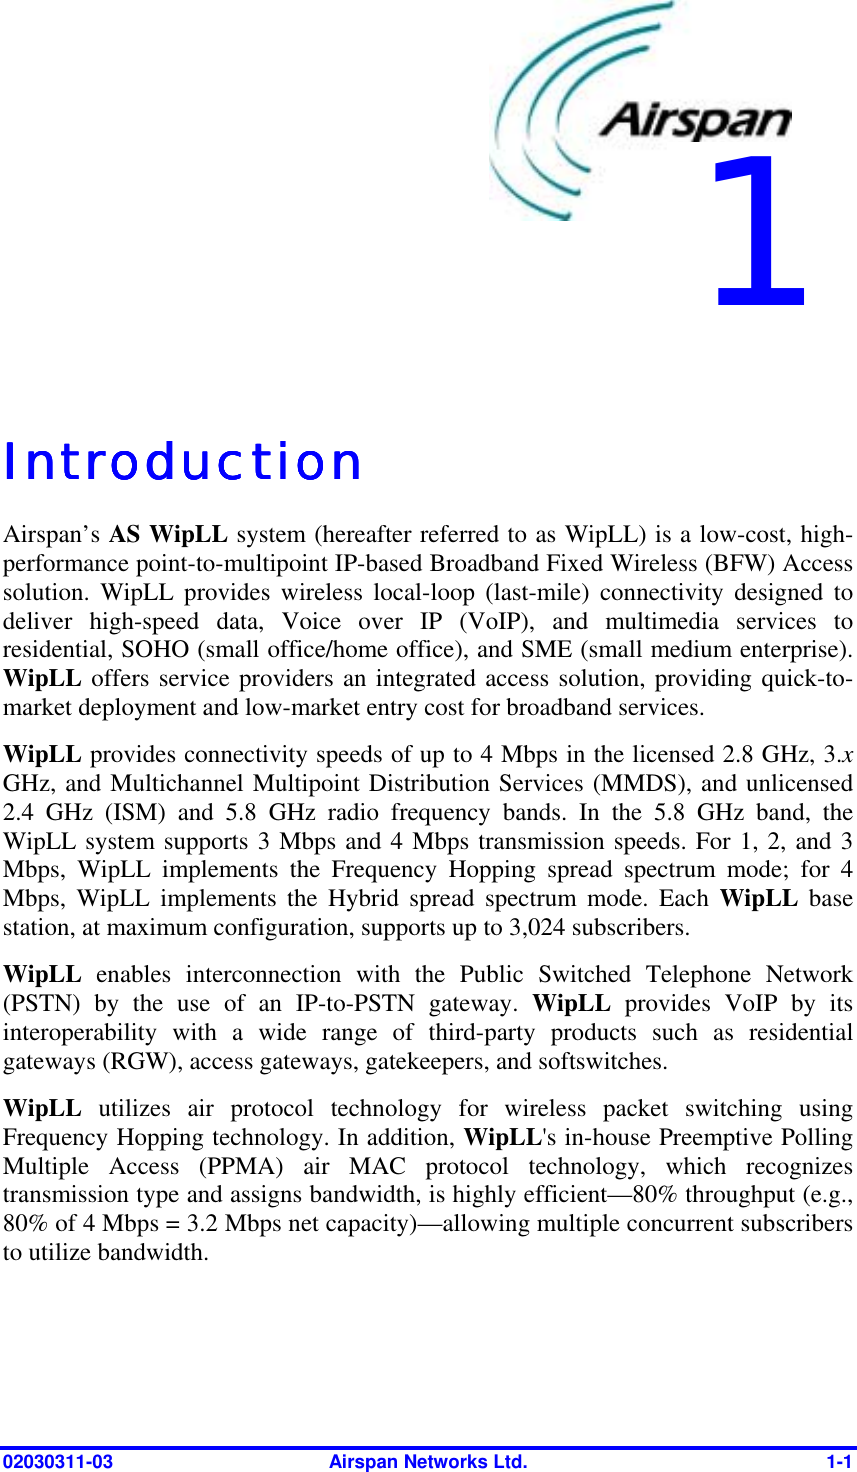  02030311-03  Airspan Networks Ltd.  1-1   IntroductionIntroductionIntroductionIntroduction    Airspan’s AS WipLL system (hereafter referred to as WipLL) is a low-cost, high-performance point-to-multipoint IP-based Broadband Fixed Wireless (BFW) Access solution. WipLL provides wireless local-loop (last-mile) connectivity designed to deliver high-speed data, Voice over IP (VoIP), and multimedia services to residential, SOHO (small office/home office), and SME (small medium enterprise). WipLL offers service providers an integrated access solution, providing quick-to-market deployment and low-market entry cost for broadband services. WipLL provides connectivity speeds of up to 4 Mbps in the licensed 2.8 GHz, 3.x GHz, and Multichannel Multipoint Distribution Services (MMDS), and unlicensed 2.4 GHz (ISM) and 5.8 GHz radio frequency bands. In the 5.8 GHz band, the WipLL system supports 3 Mbps and 4 Mbps transmission speeds. For 1, 2, and 3 Mbps, WipLL implements the Frequency Hopping spread spectrum mode; for 4 Mbps, WipLL implements the Hybrid spread spectrum mode. Each WipLL base station, at maximum configuration, supports up to 3,024 subscribers. WipLL enables interconnection with the Public Switched Telephone Network (PSTN) by the use of an IP-to-PSTN gateway. WipLL provides VoIP by its interoperability with a wide range of third-party products such as residential gateways (RGW), access gateways, gatekeepers, and softswitches. WipLL  utilizes air protocol technology for wireless packet switching using Frequency Hopping technology. In addition, WipLL&apos;s in-house Preemptive Polling Multiple Access (PPMA) air MAC protocol technology, which recognizes transmission type and assigns bandwidth, is highly efficient—80% throughput (e.g., 80% of 4 Mbps = 3.2 Mbps net capacity)—allowing multiple concurrent subscribers to utilize bandwidth. 1 